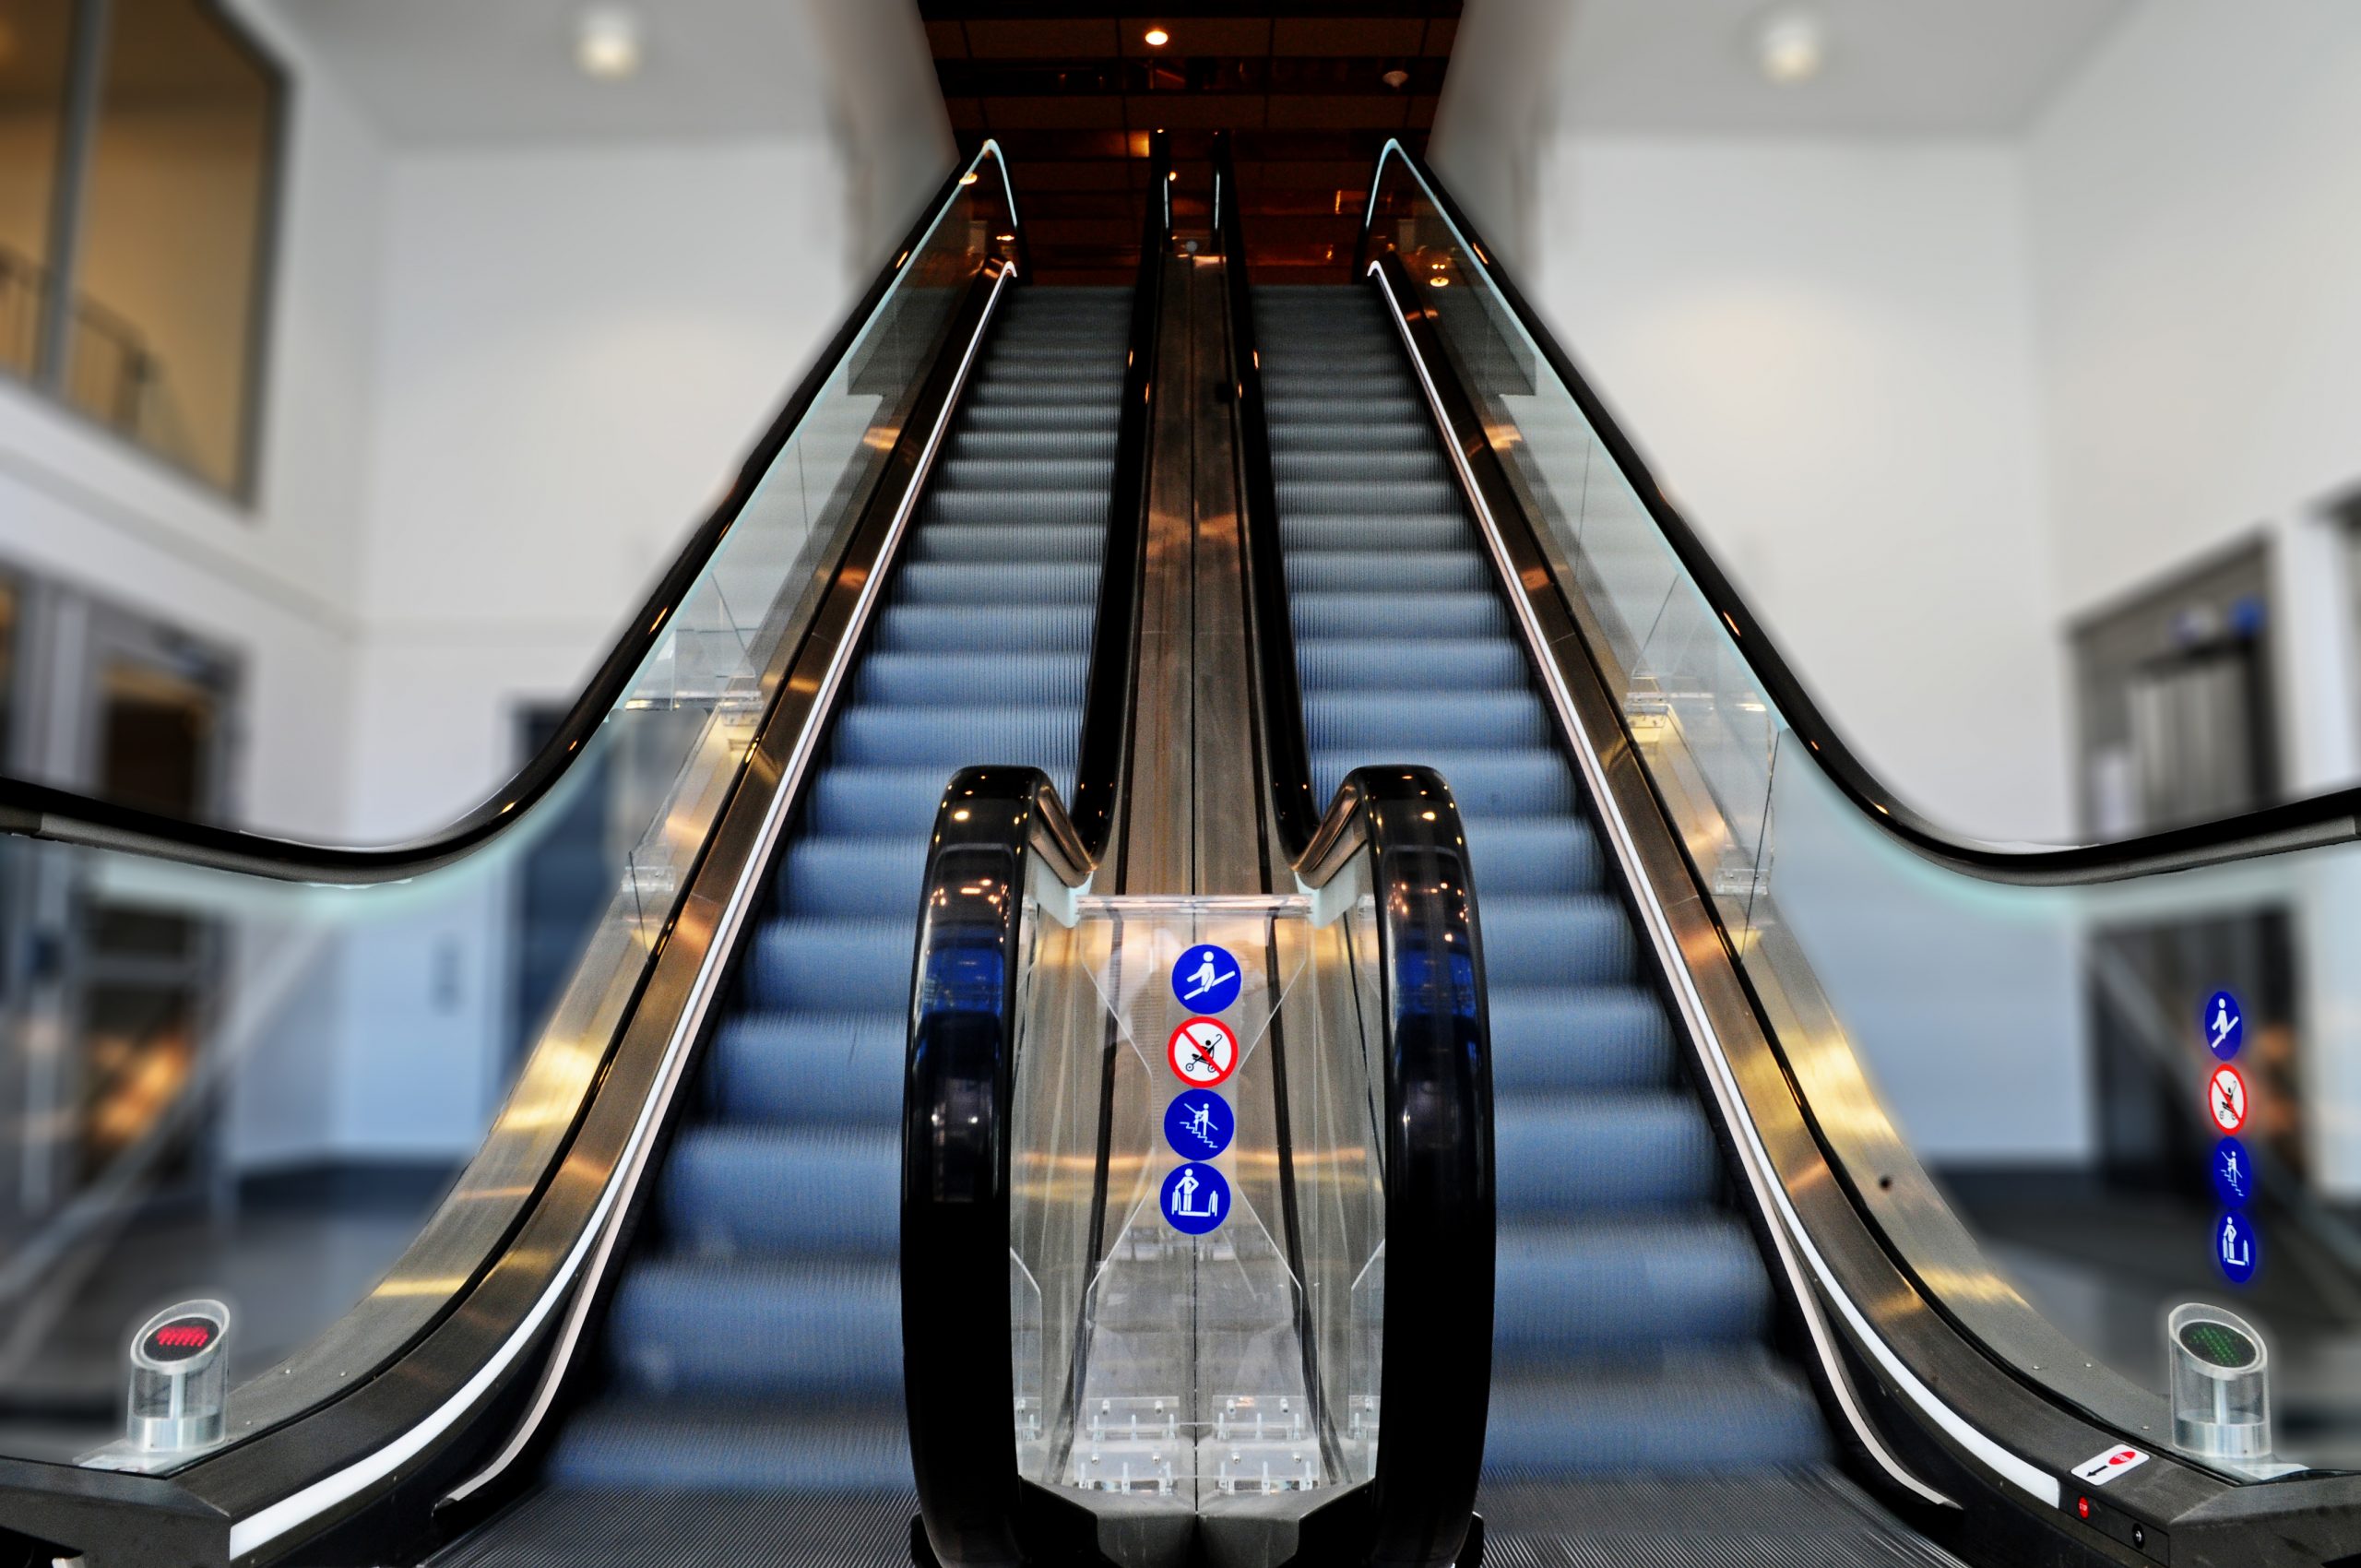 Elevator and Escalator Market Global Insights and Trends 2019, Advancement Outlook Till 2026